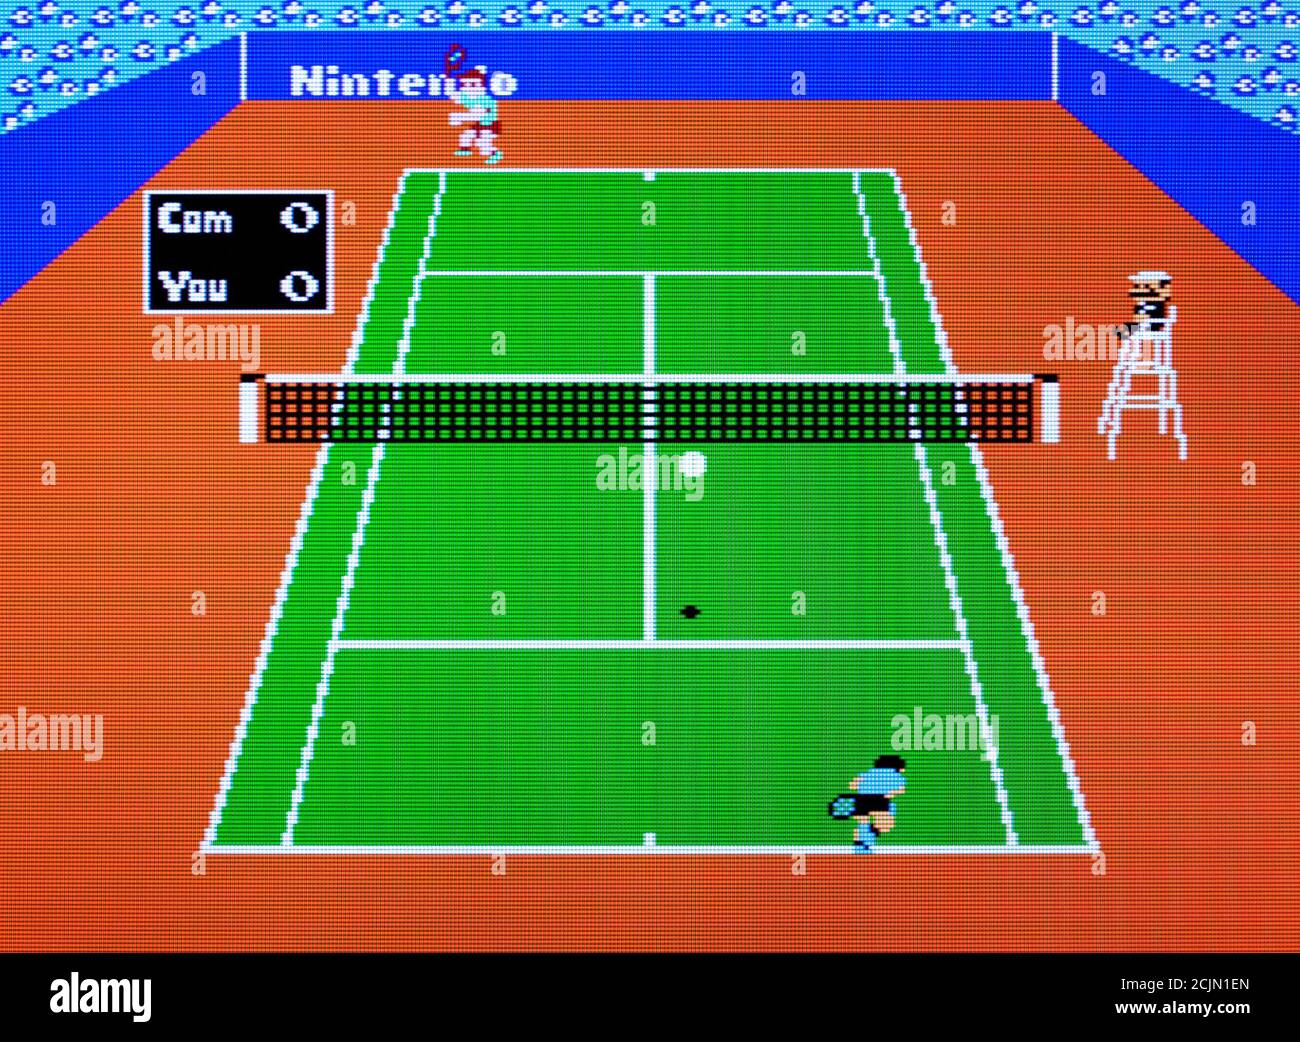 Tennis - Nintendo Entertainment System - NES Videogame - Editorial use only  Stock Photo - Alamy